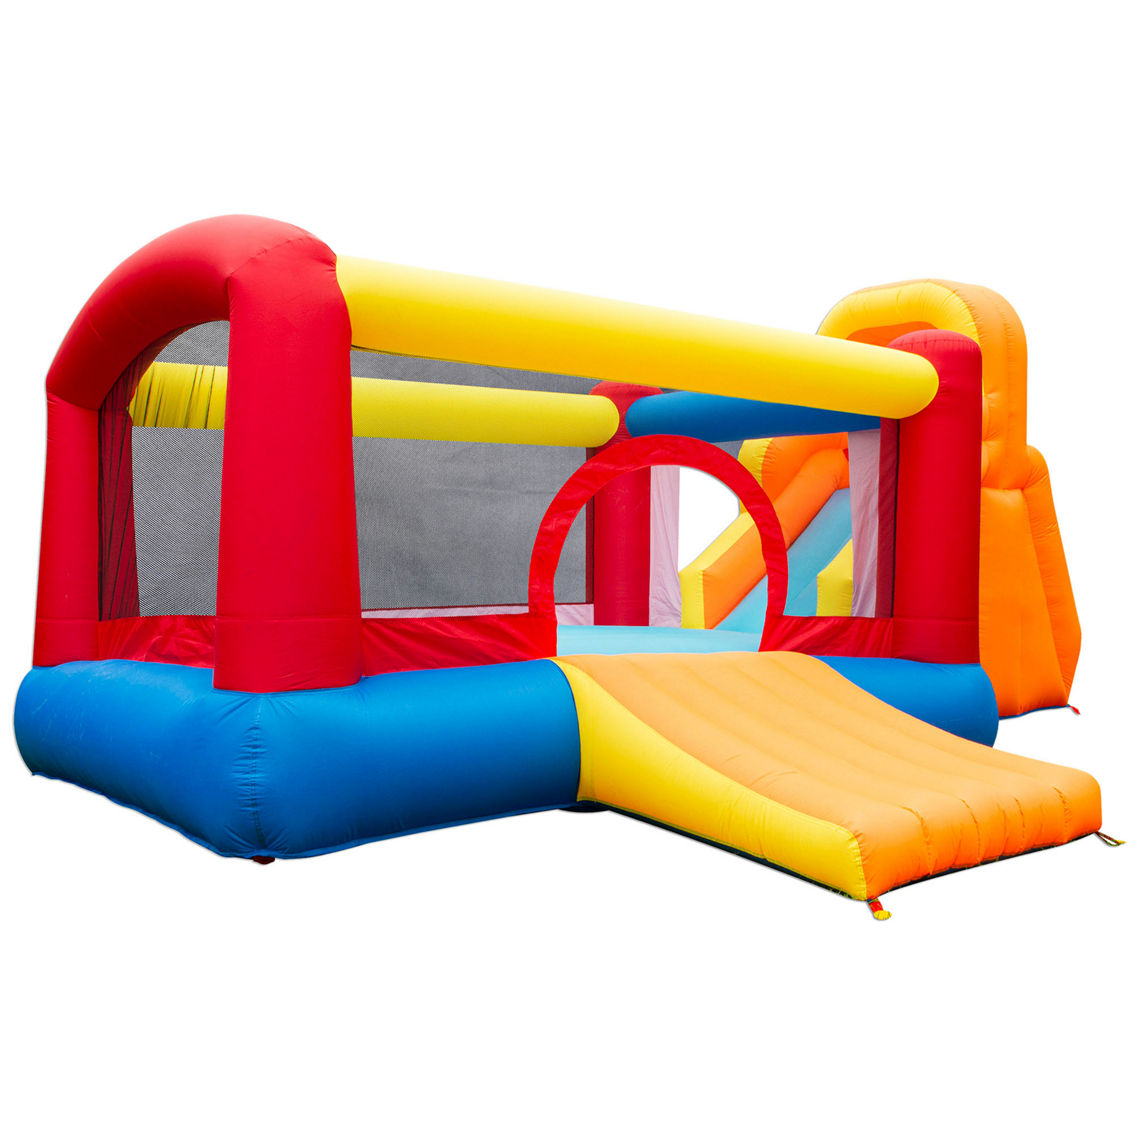 Double Slide Bouncer - Image 4 of 8